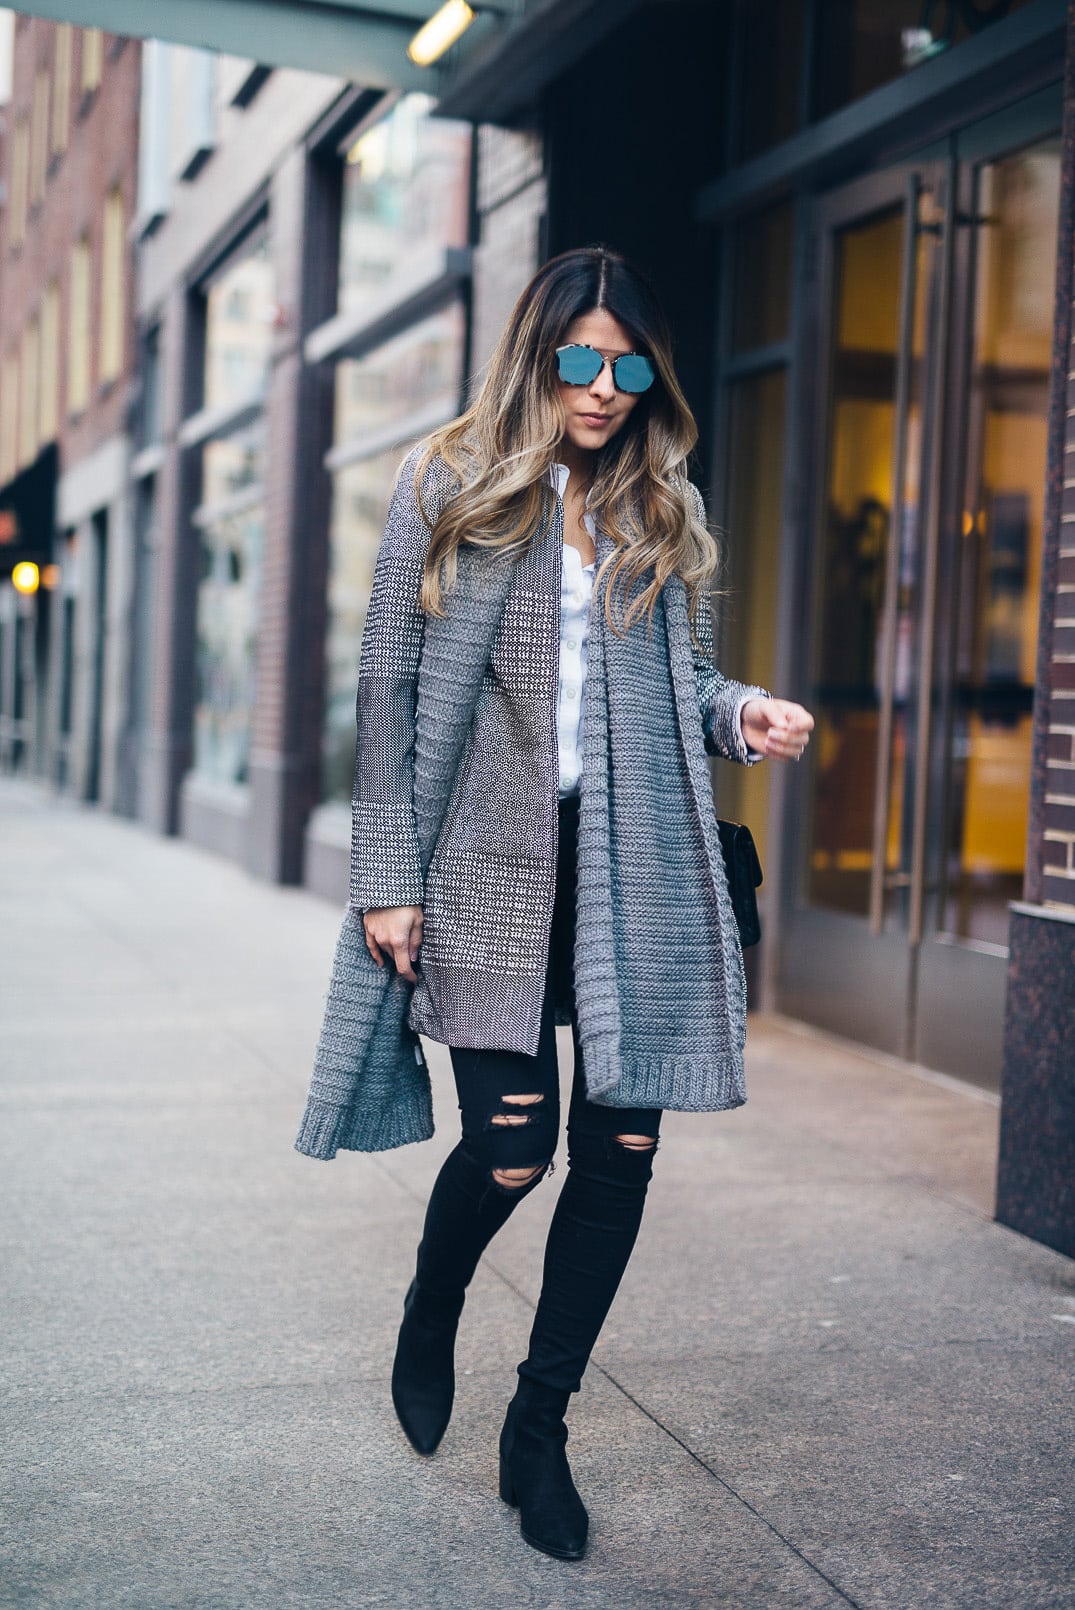 Pam Hetlinger wearing a Textured-weave Jacket, dstld ripped jeans, aldo low heel booties, dior abstract sunglasses, gray scarf, and chanel french riviera flap.